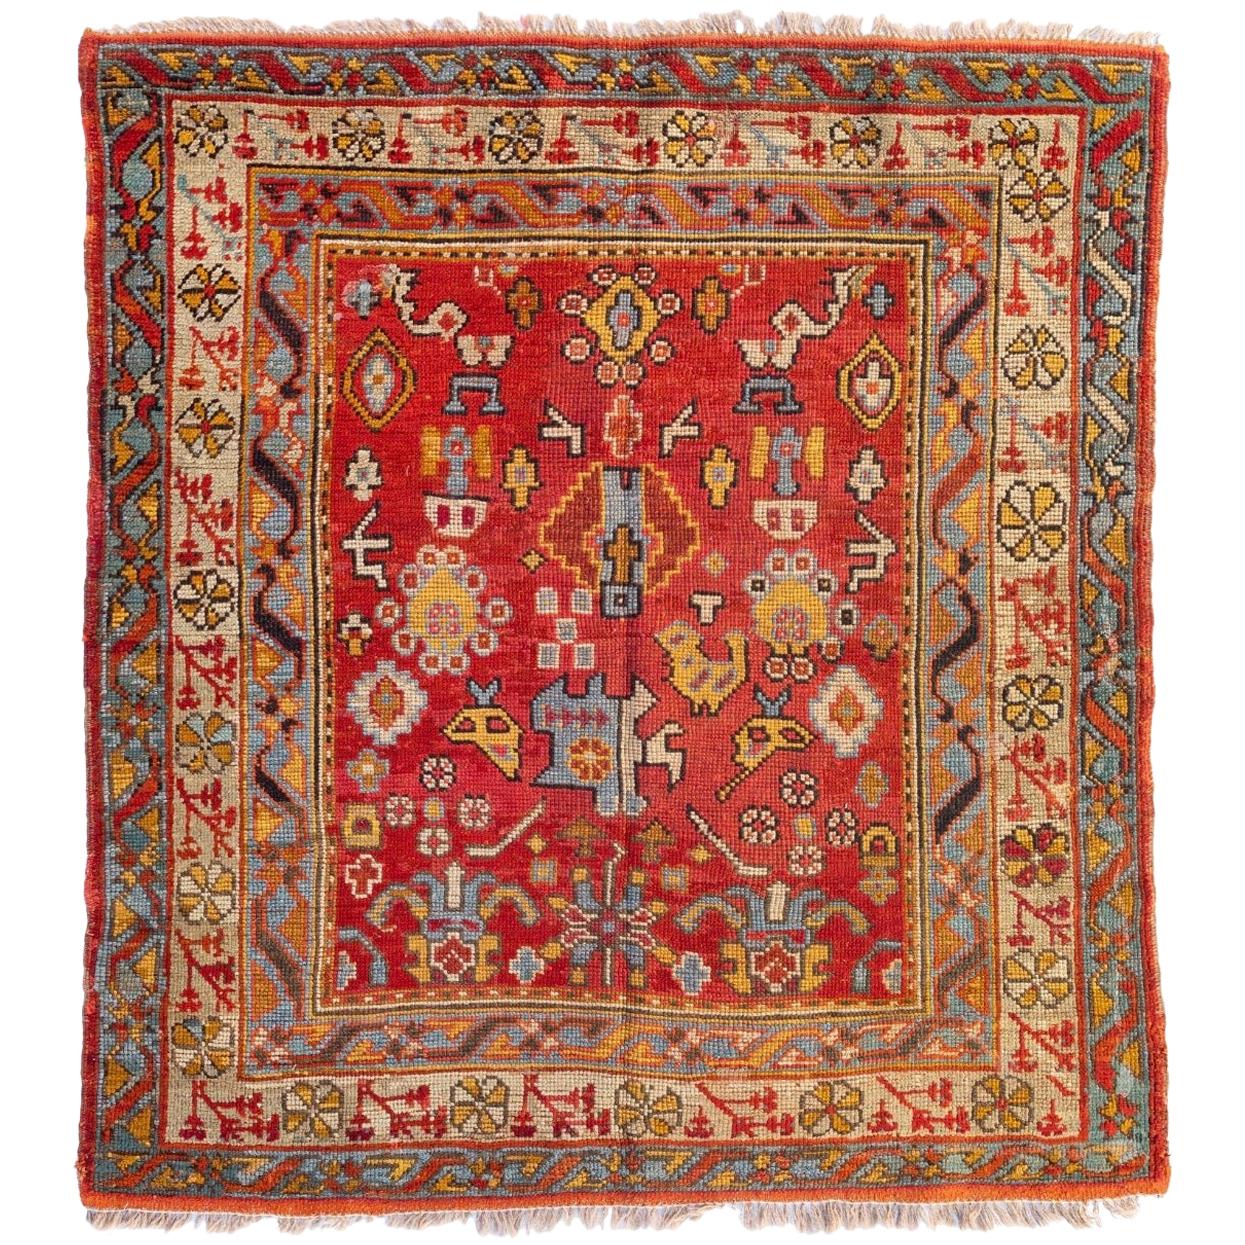 Antique Square Red Gold Light Blue Ivory Turkish Oushak Area Rug circa 1880-1900 For Sale